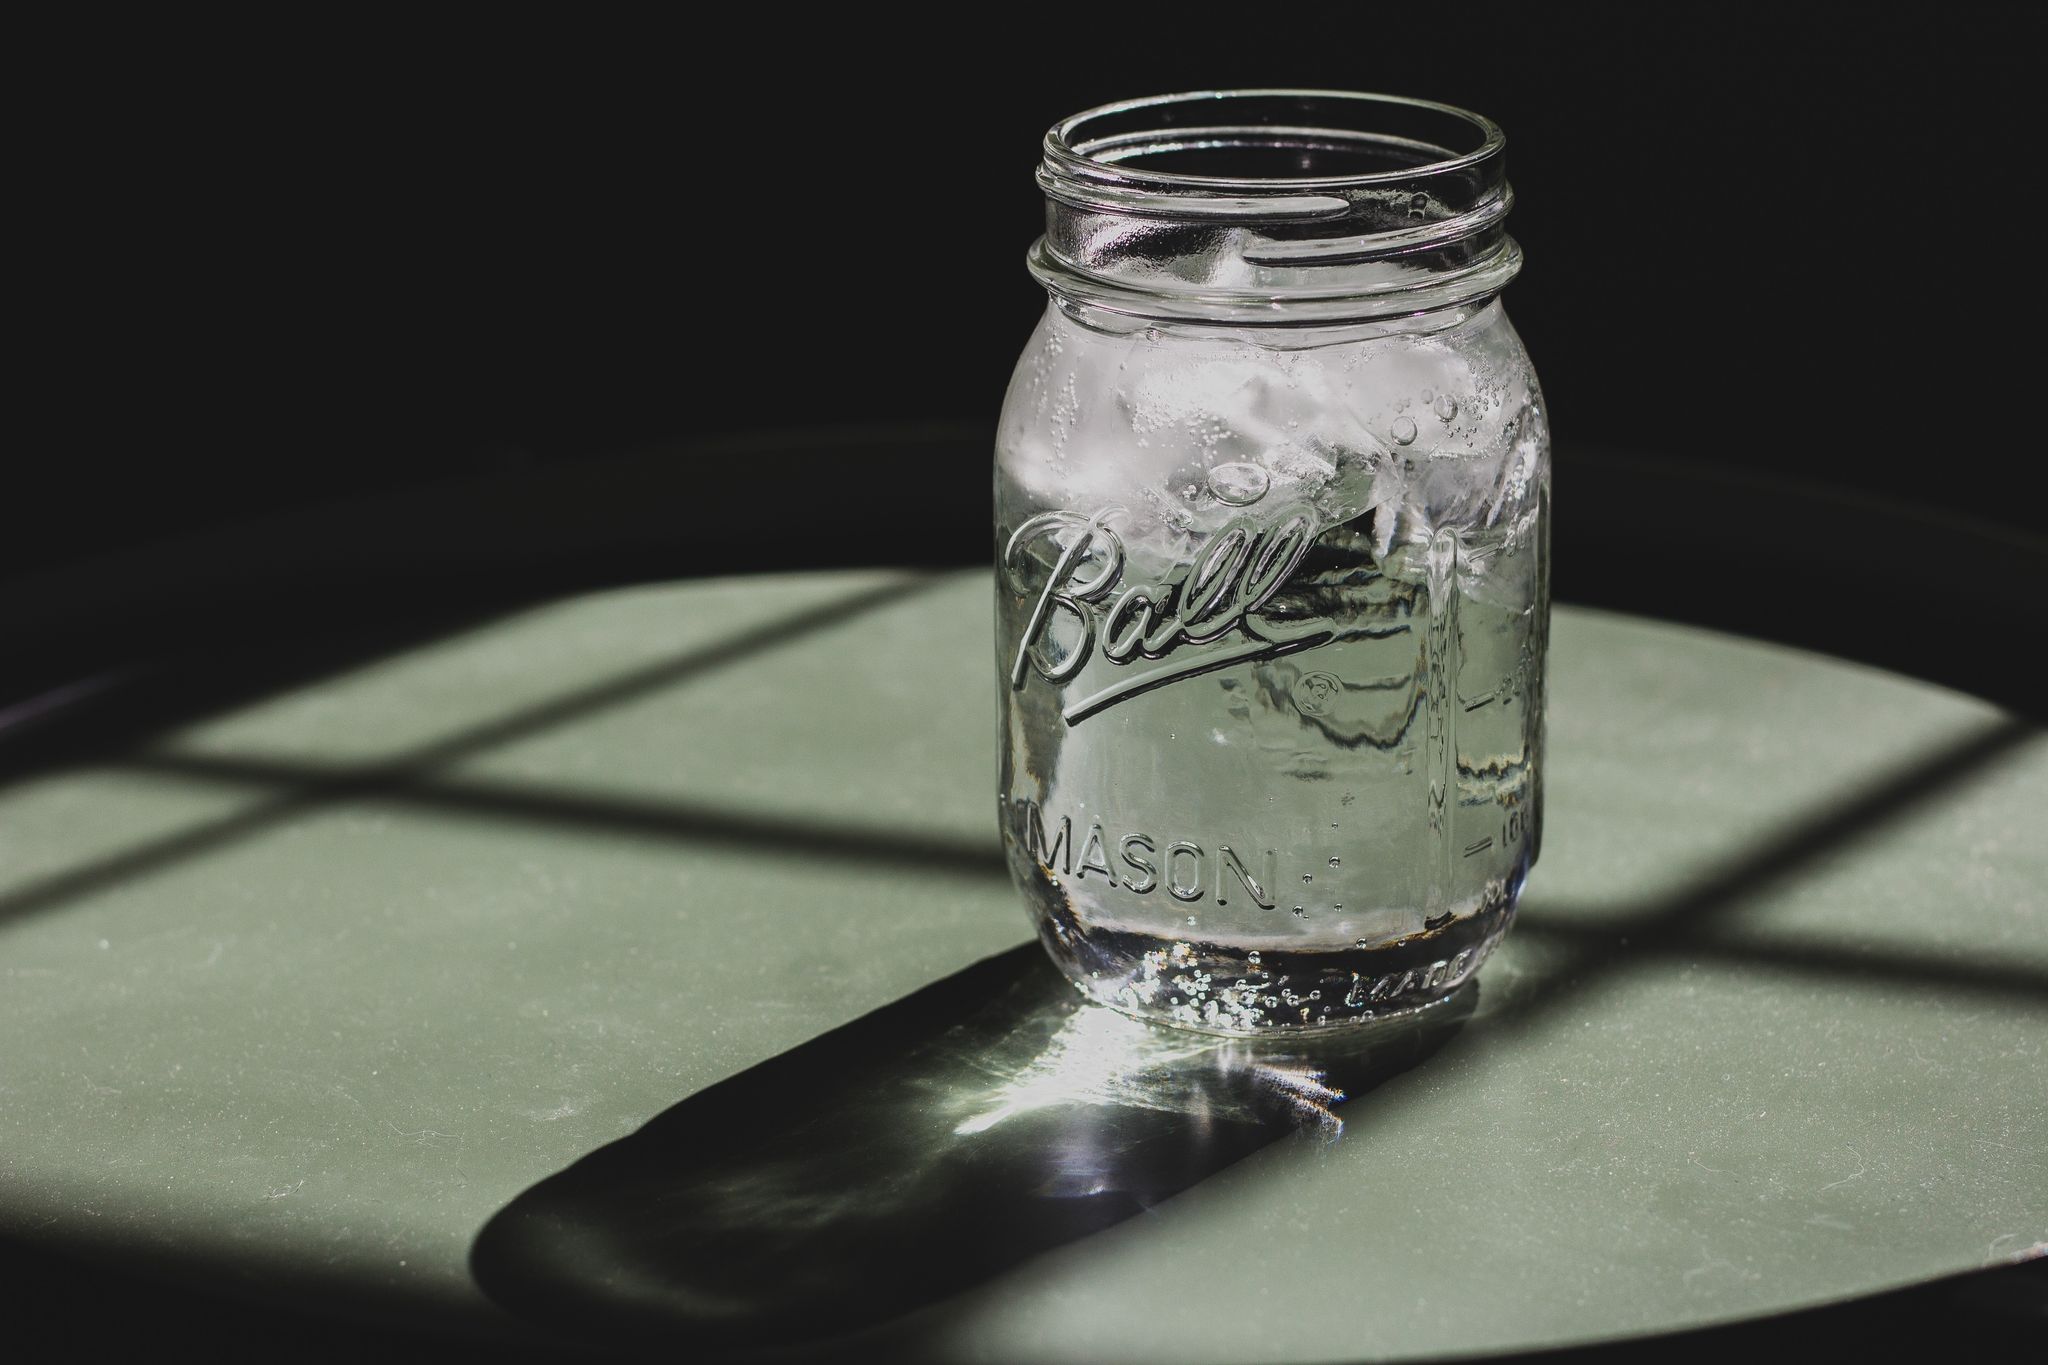 Mason jar, Water, Glass, Drinkware, Still life photography, Black-and-white, Transparent material, Tableware, Glass bottle, Photography, 